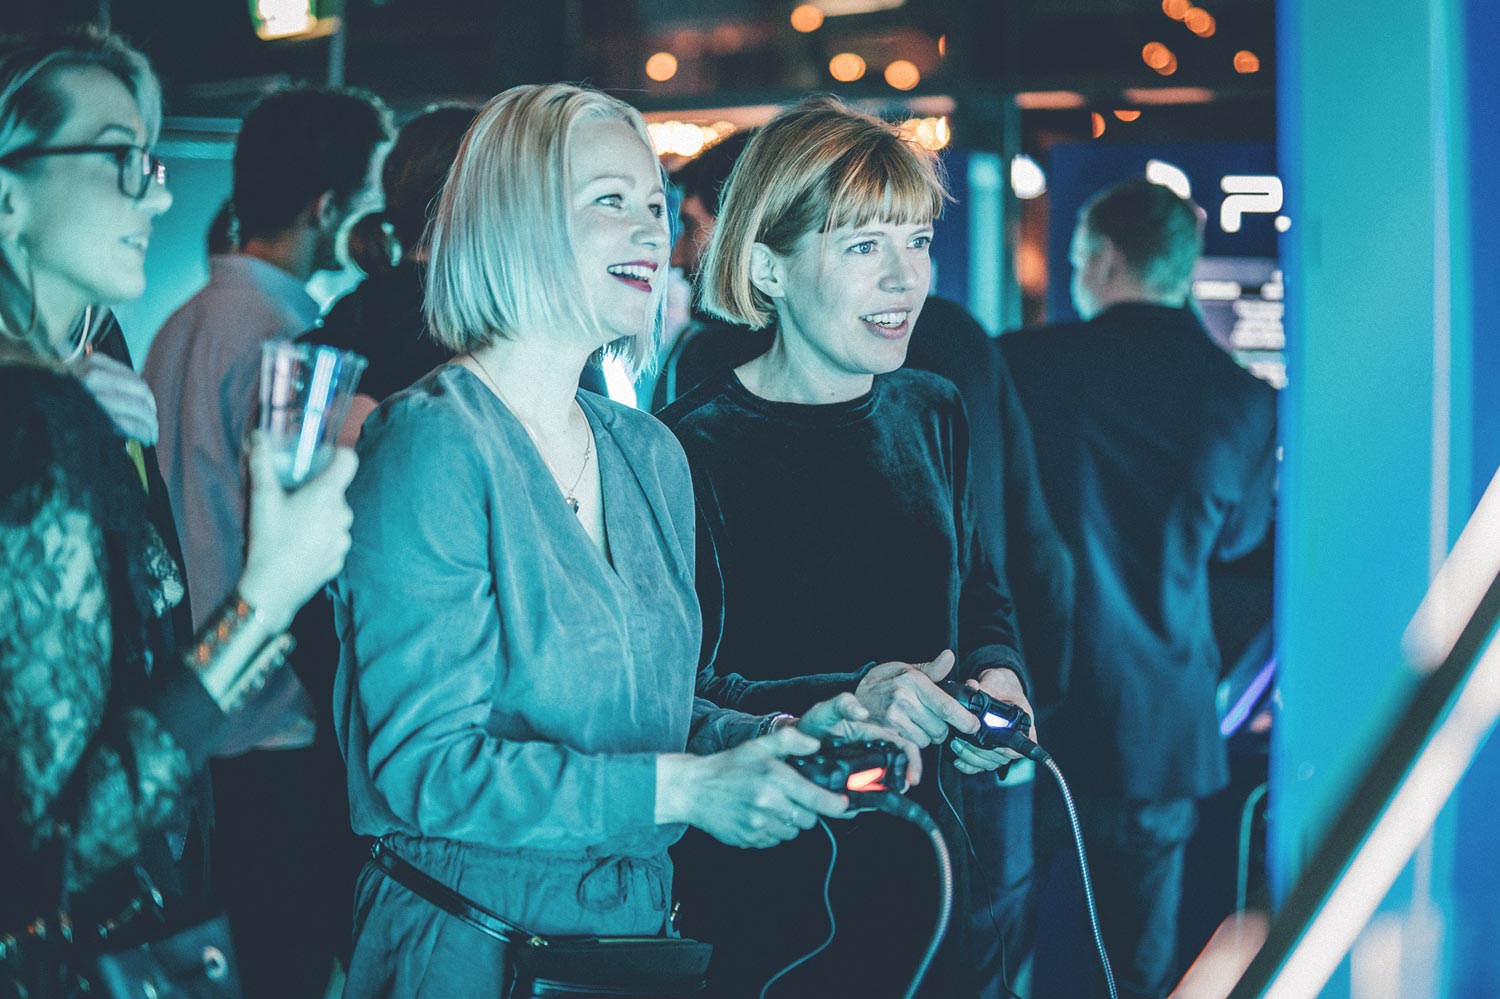 Ubisoft RedLynx women employees playing games at an event